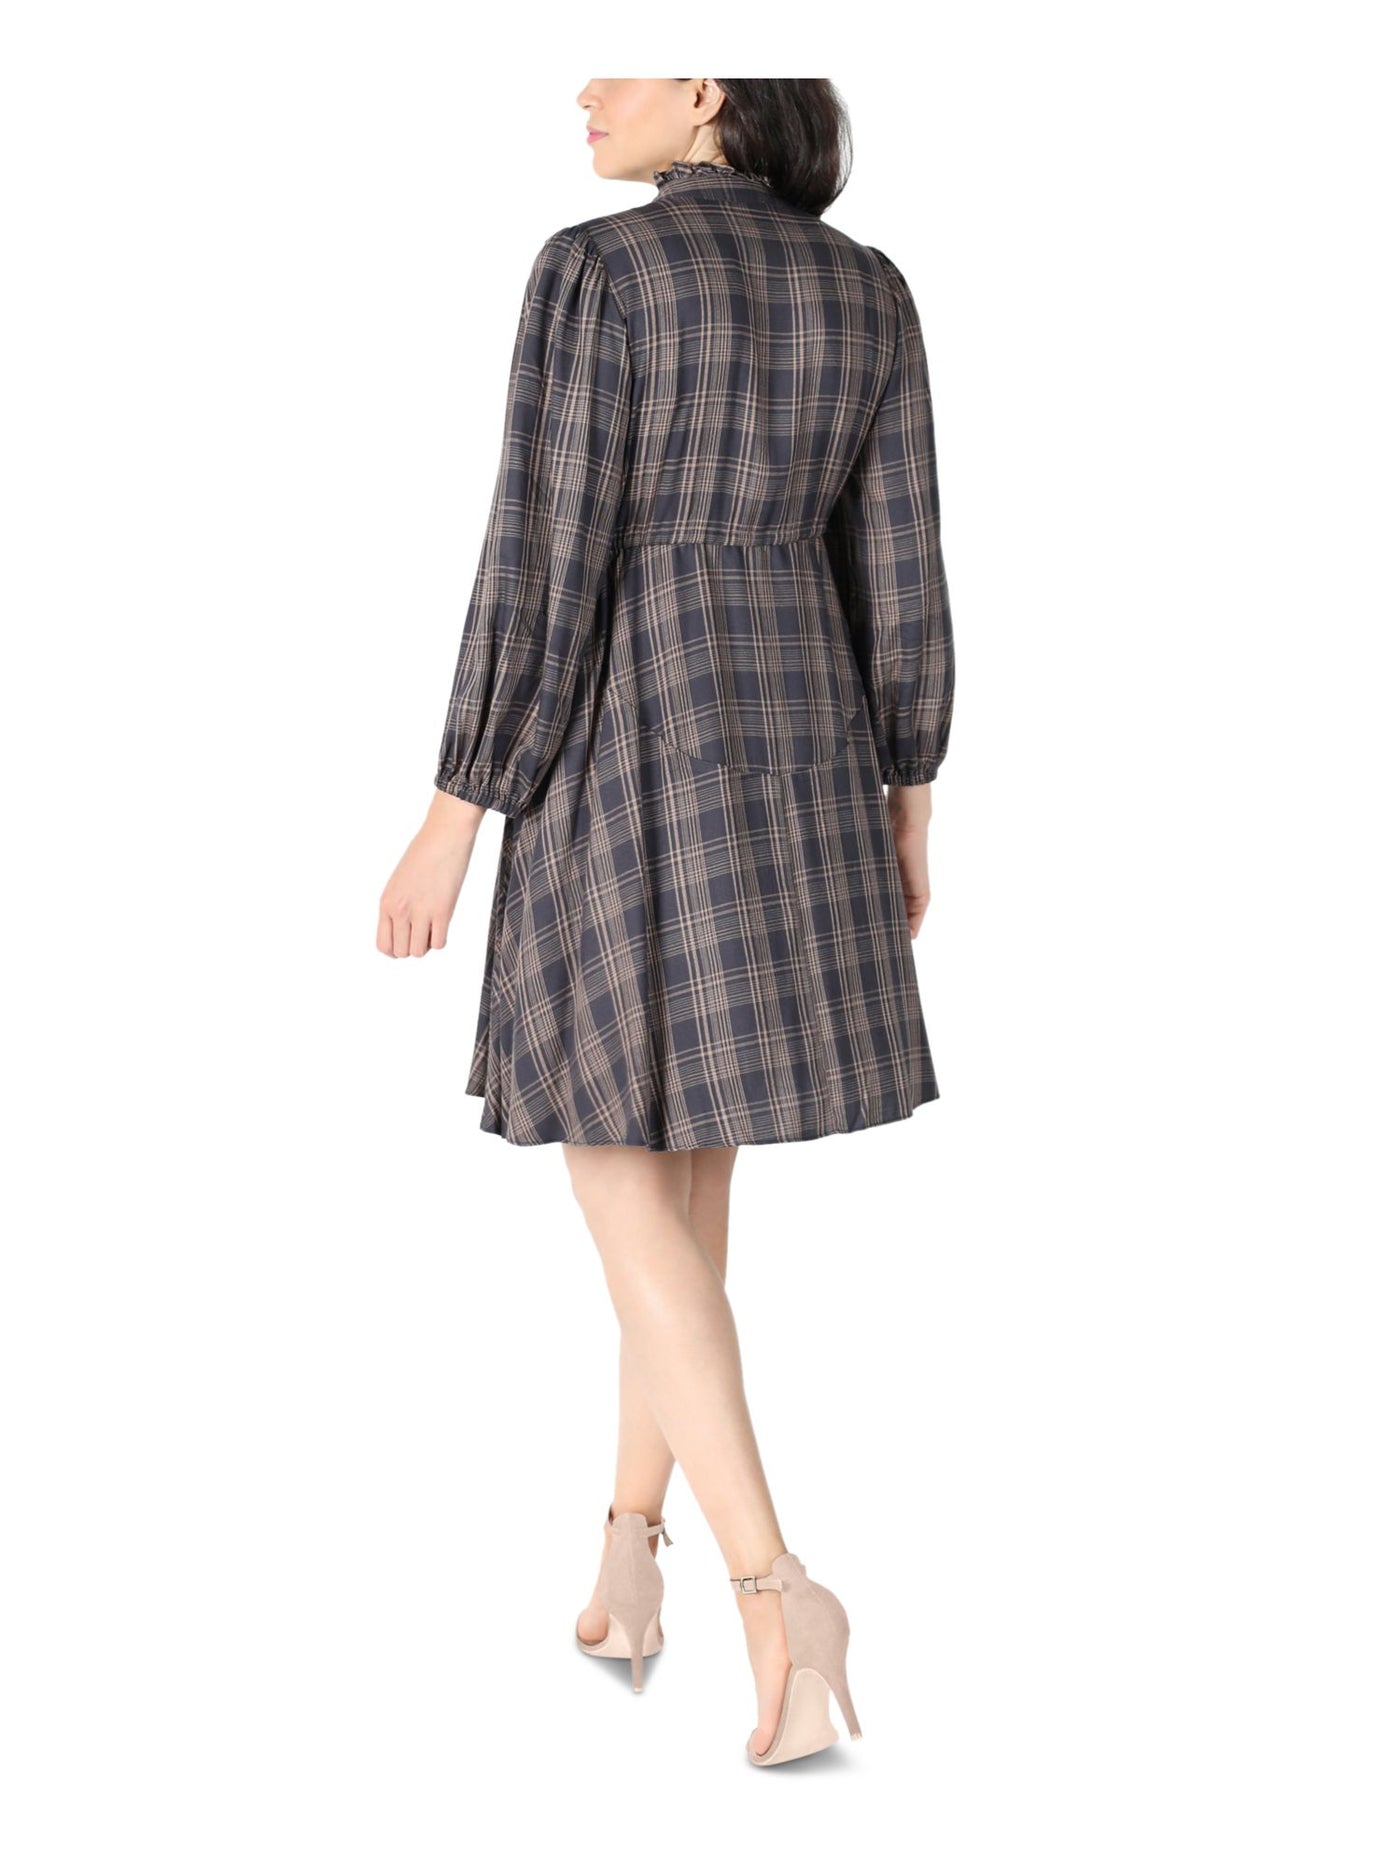 SIGNATURE BY ROBBIE BEE Womens Gray Ruffled Drawstring Waist Unlined Plaid Balloon Sleeve Split Above The Knee Fit + Flare Dress Petites 6P